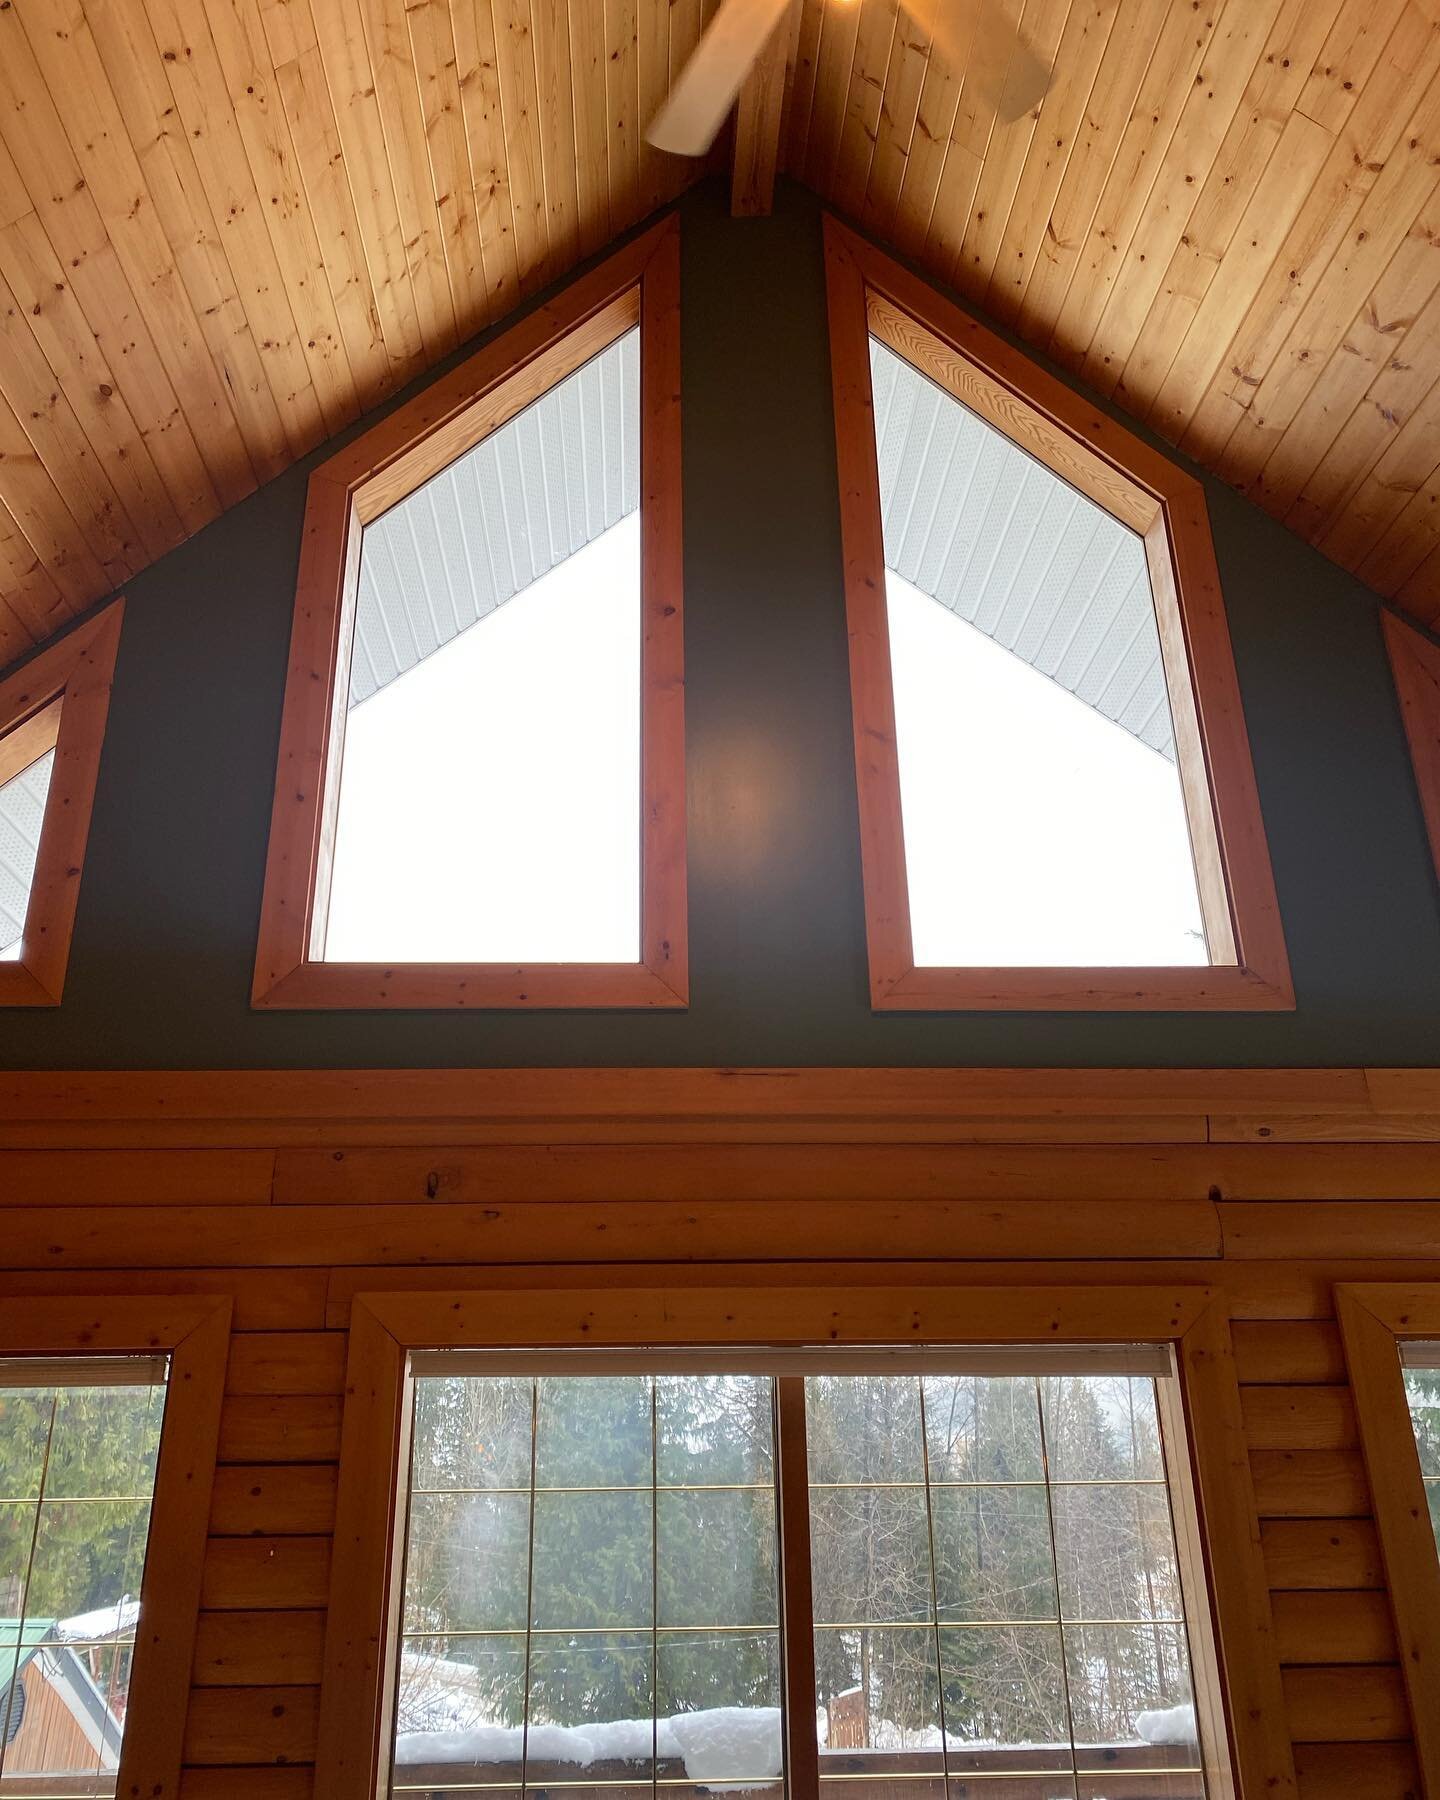 This cozy cabin repaint has us dreaming of more snow days to come ❄️⛷️

#cabin #repaint #woodceiling 

@benjaminmoorepro 
@benjaminmoore